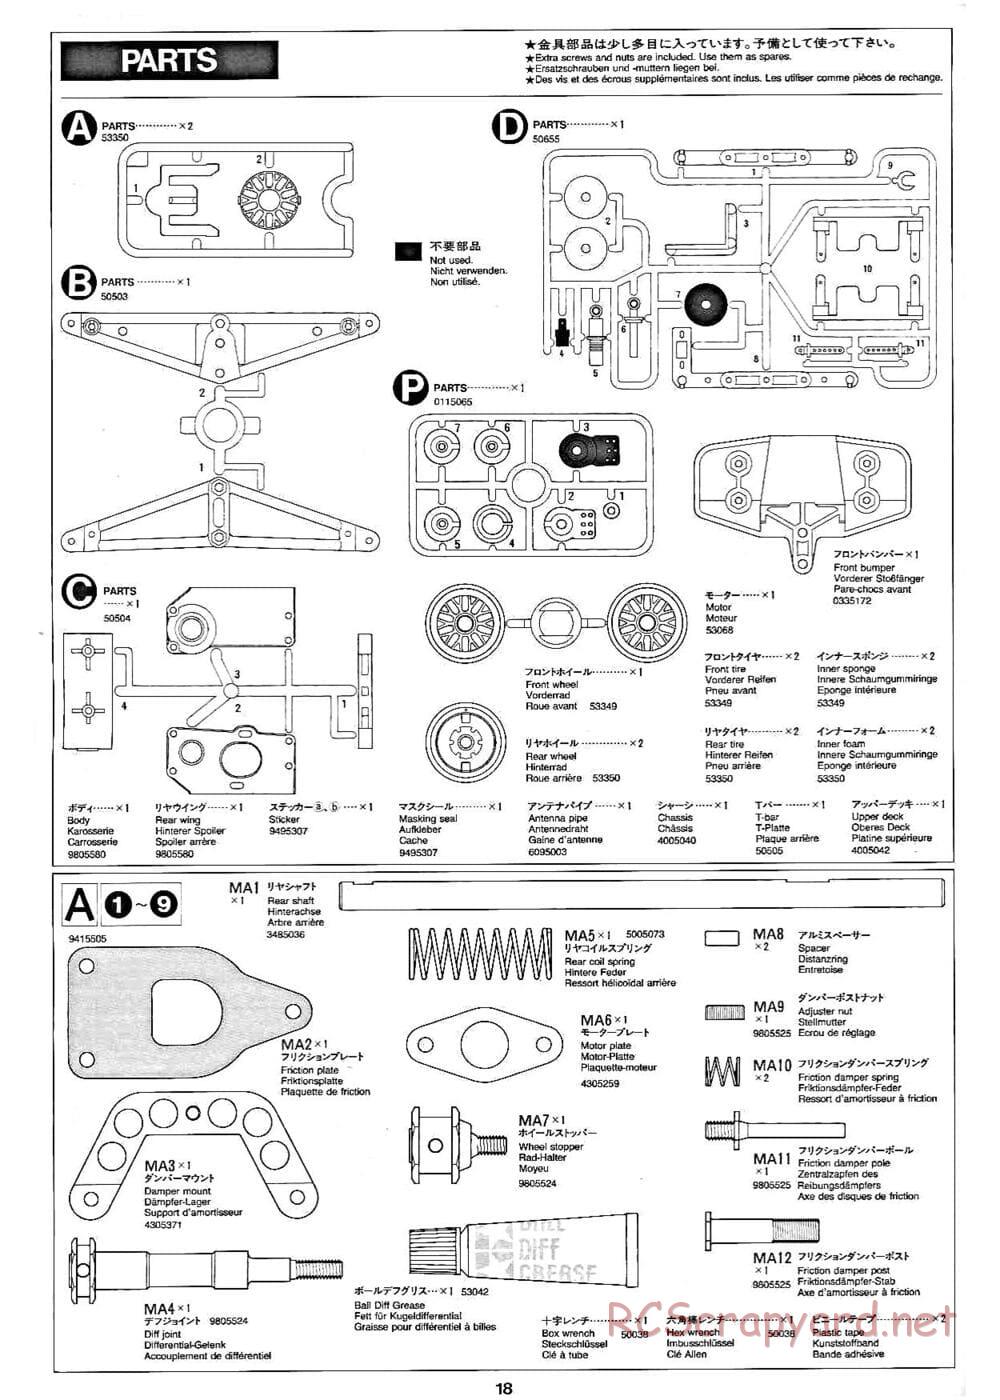 Tamiya - Toyota GT-One TS020 - F103RS Chassis - Manual - Page 18